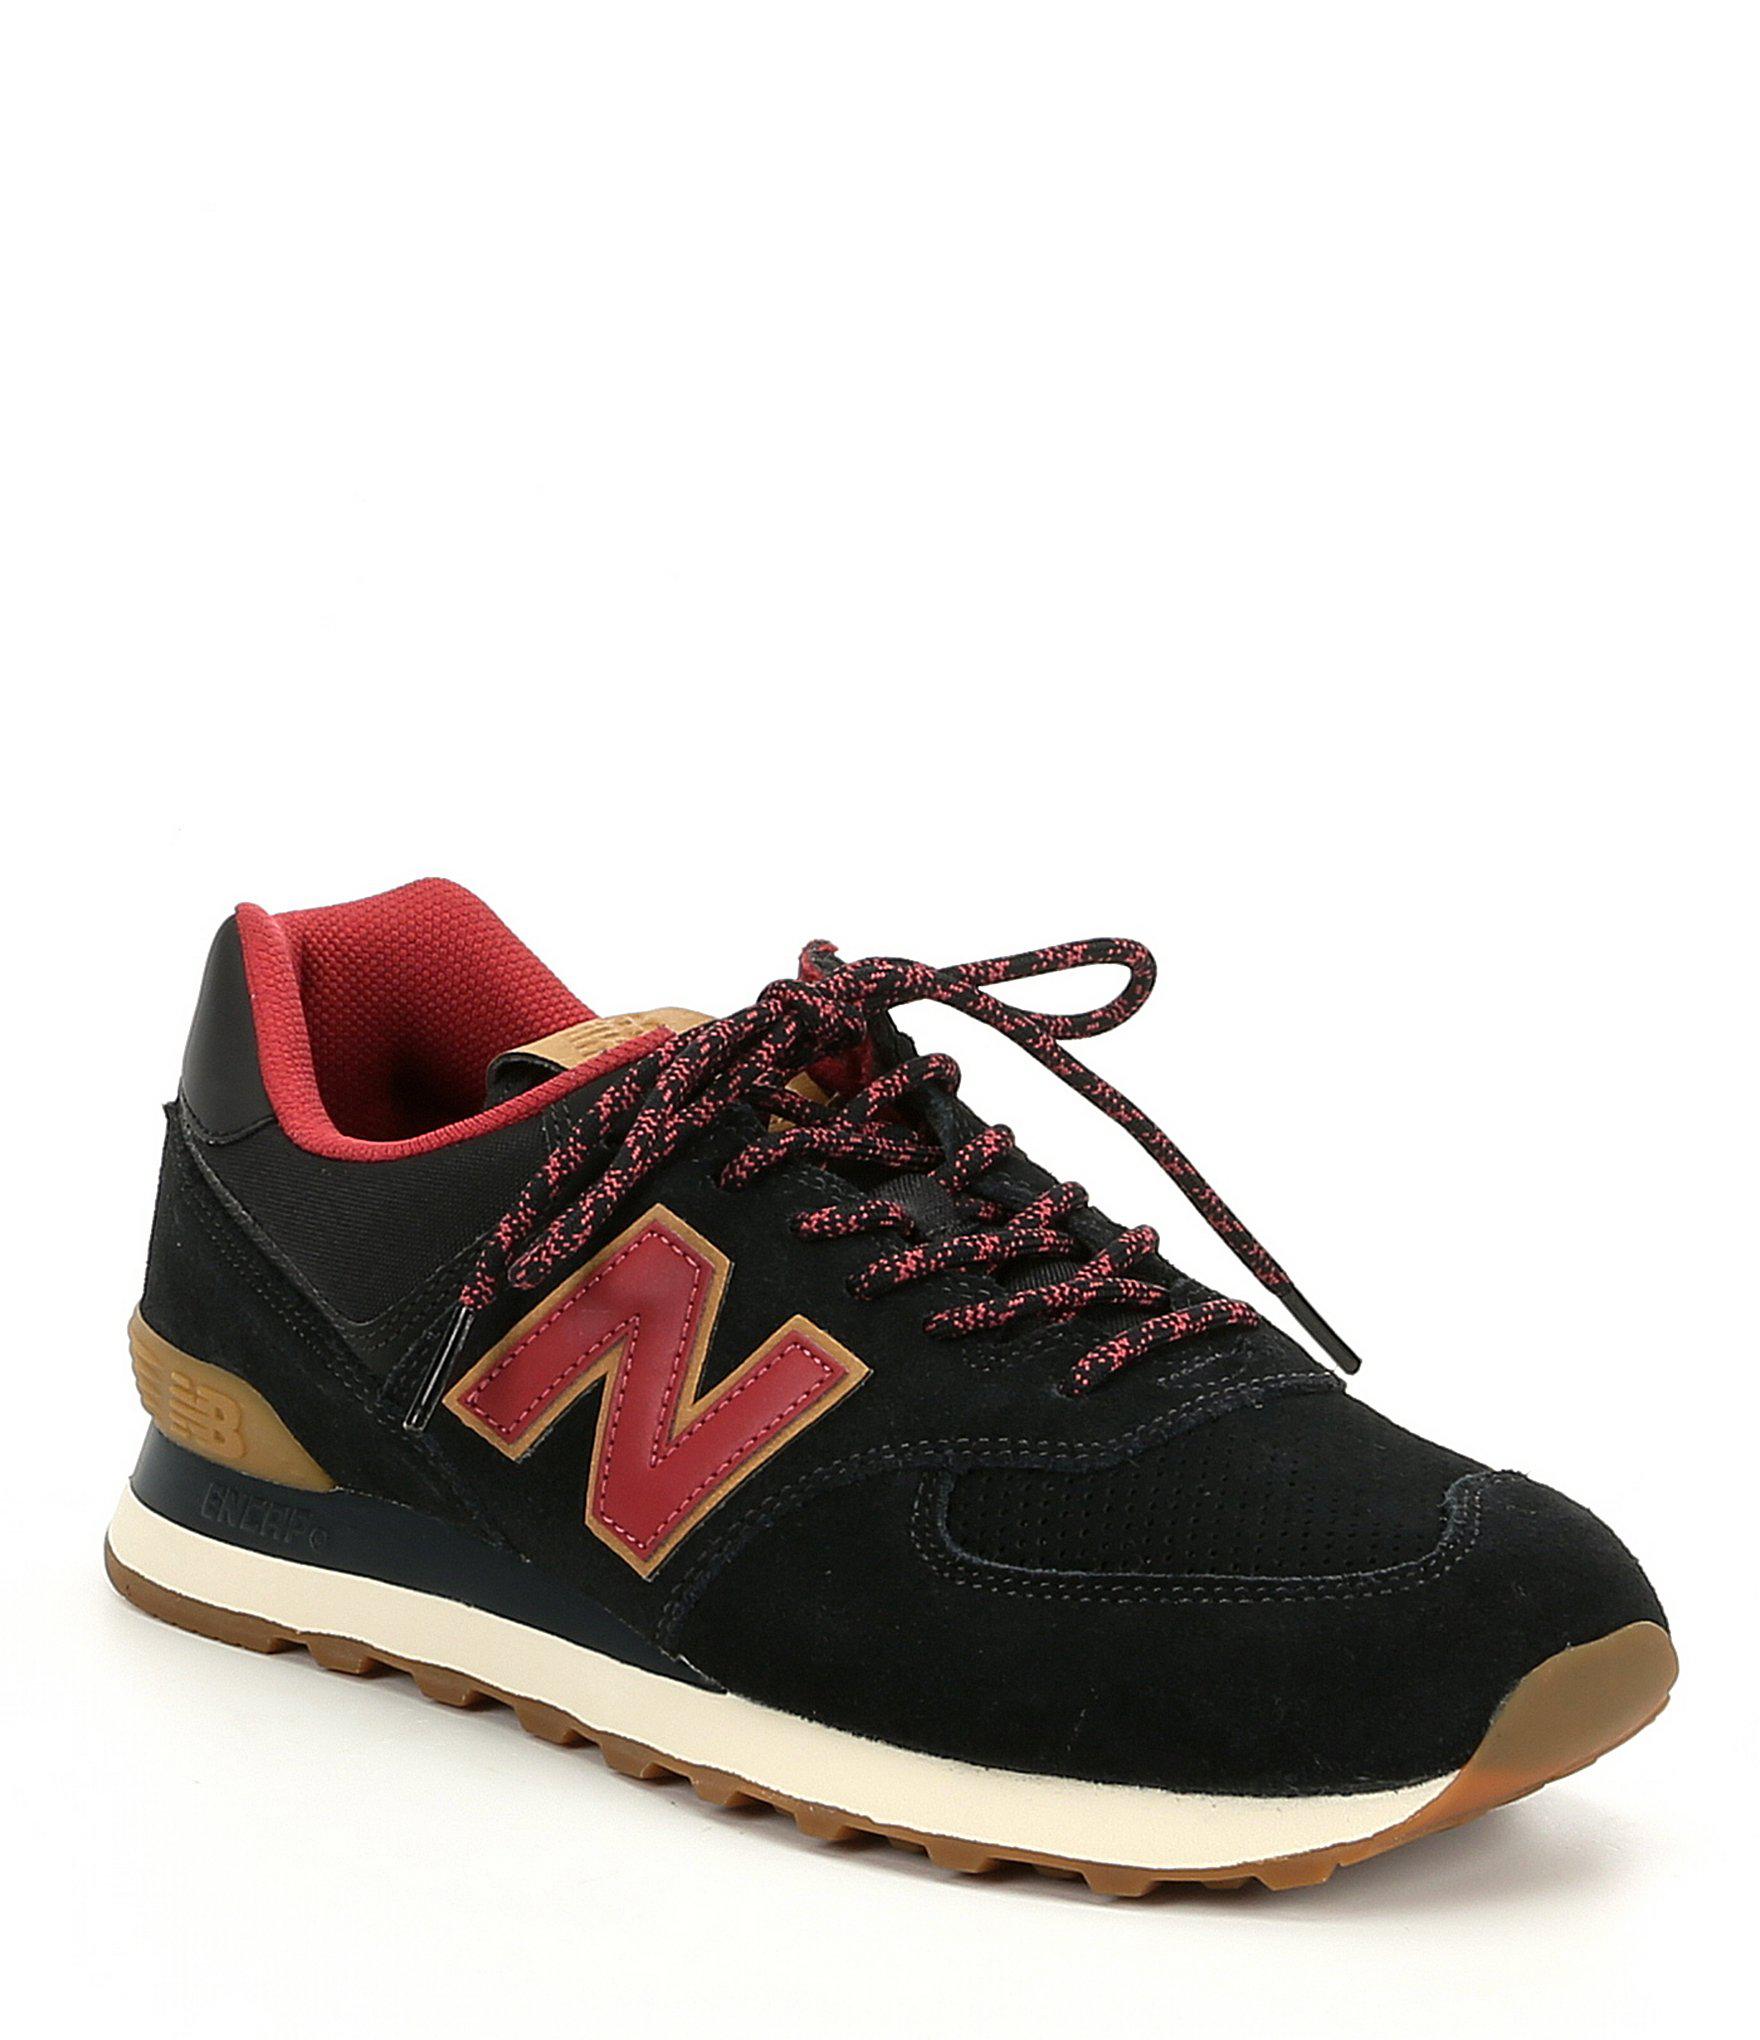 new balance 574 black earth red, OFF 79 